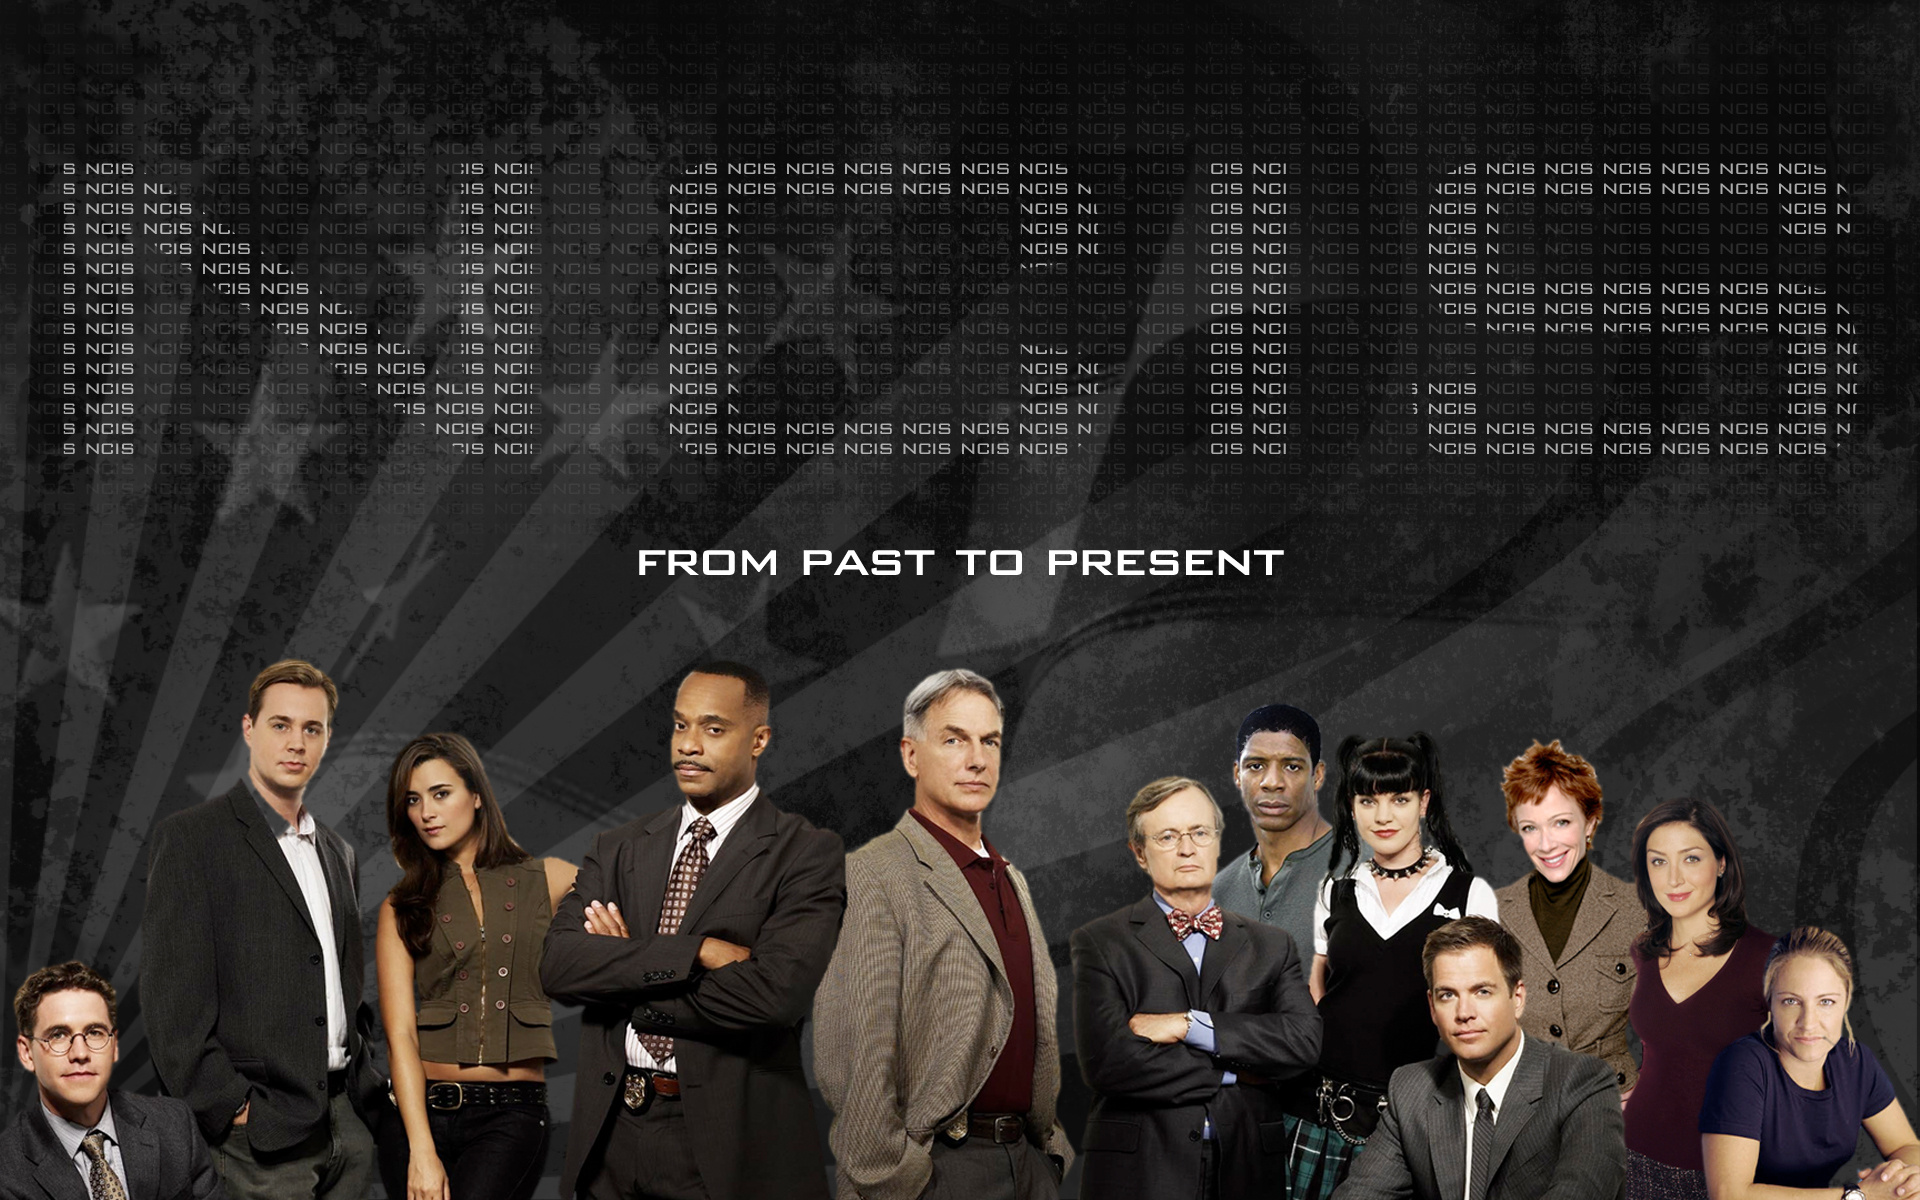 NCIS: Naval Criminal Investigative Service: The long-running crime drama, The most-watched scripted series on American TV. 1920x1200 HD Wallpaper.